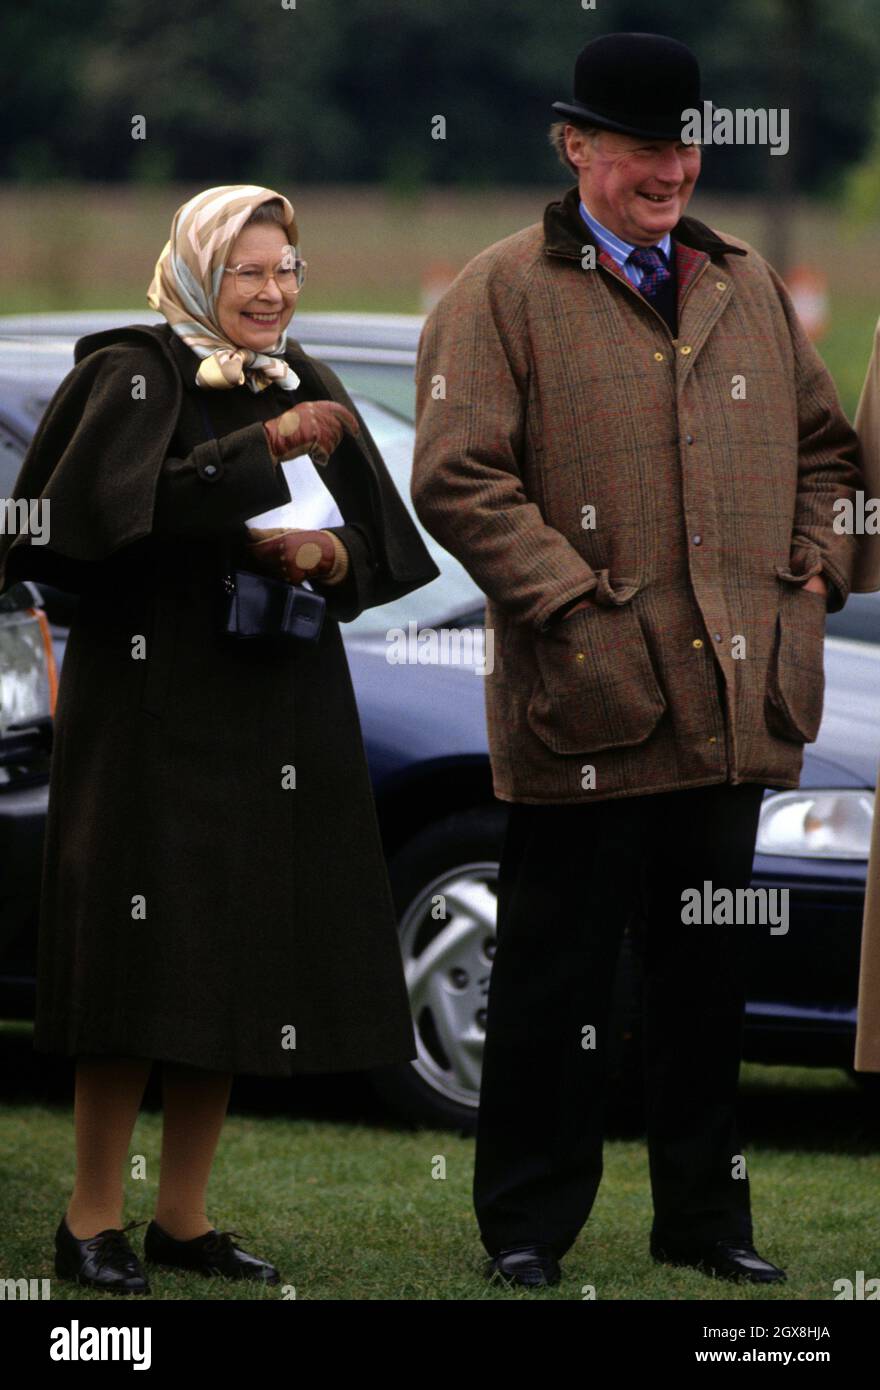 Queen Elizabeth II and Horse Trainer Howard Johnson attending the Windsor  Horse Show in Windsor Stock Photo - Alamy